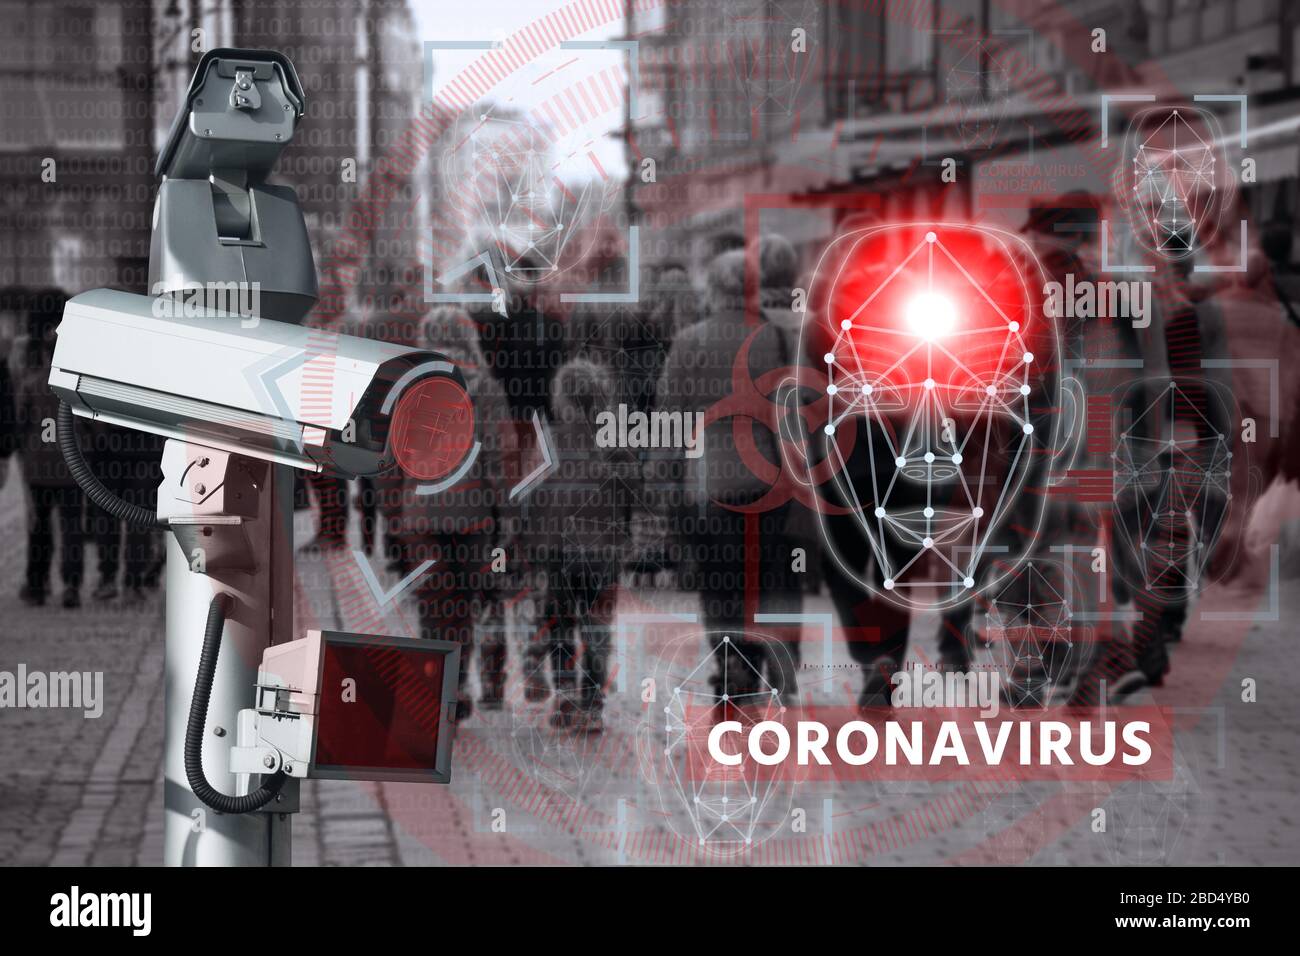 Camera with face recognition and thermal imager system to search for patients with coronavirus Stock Photo